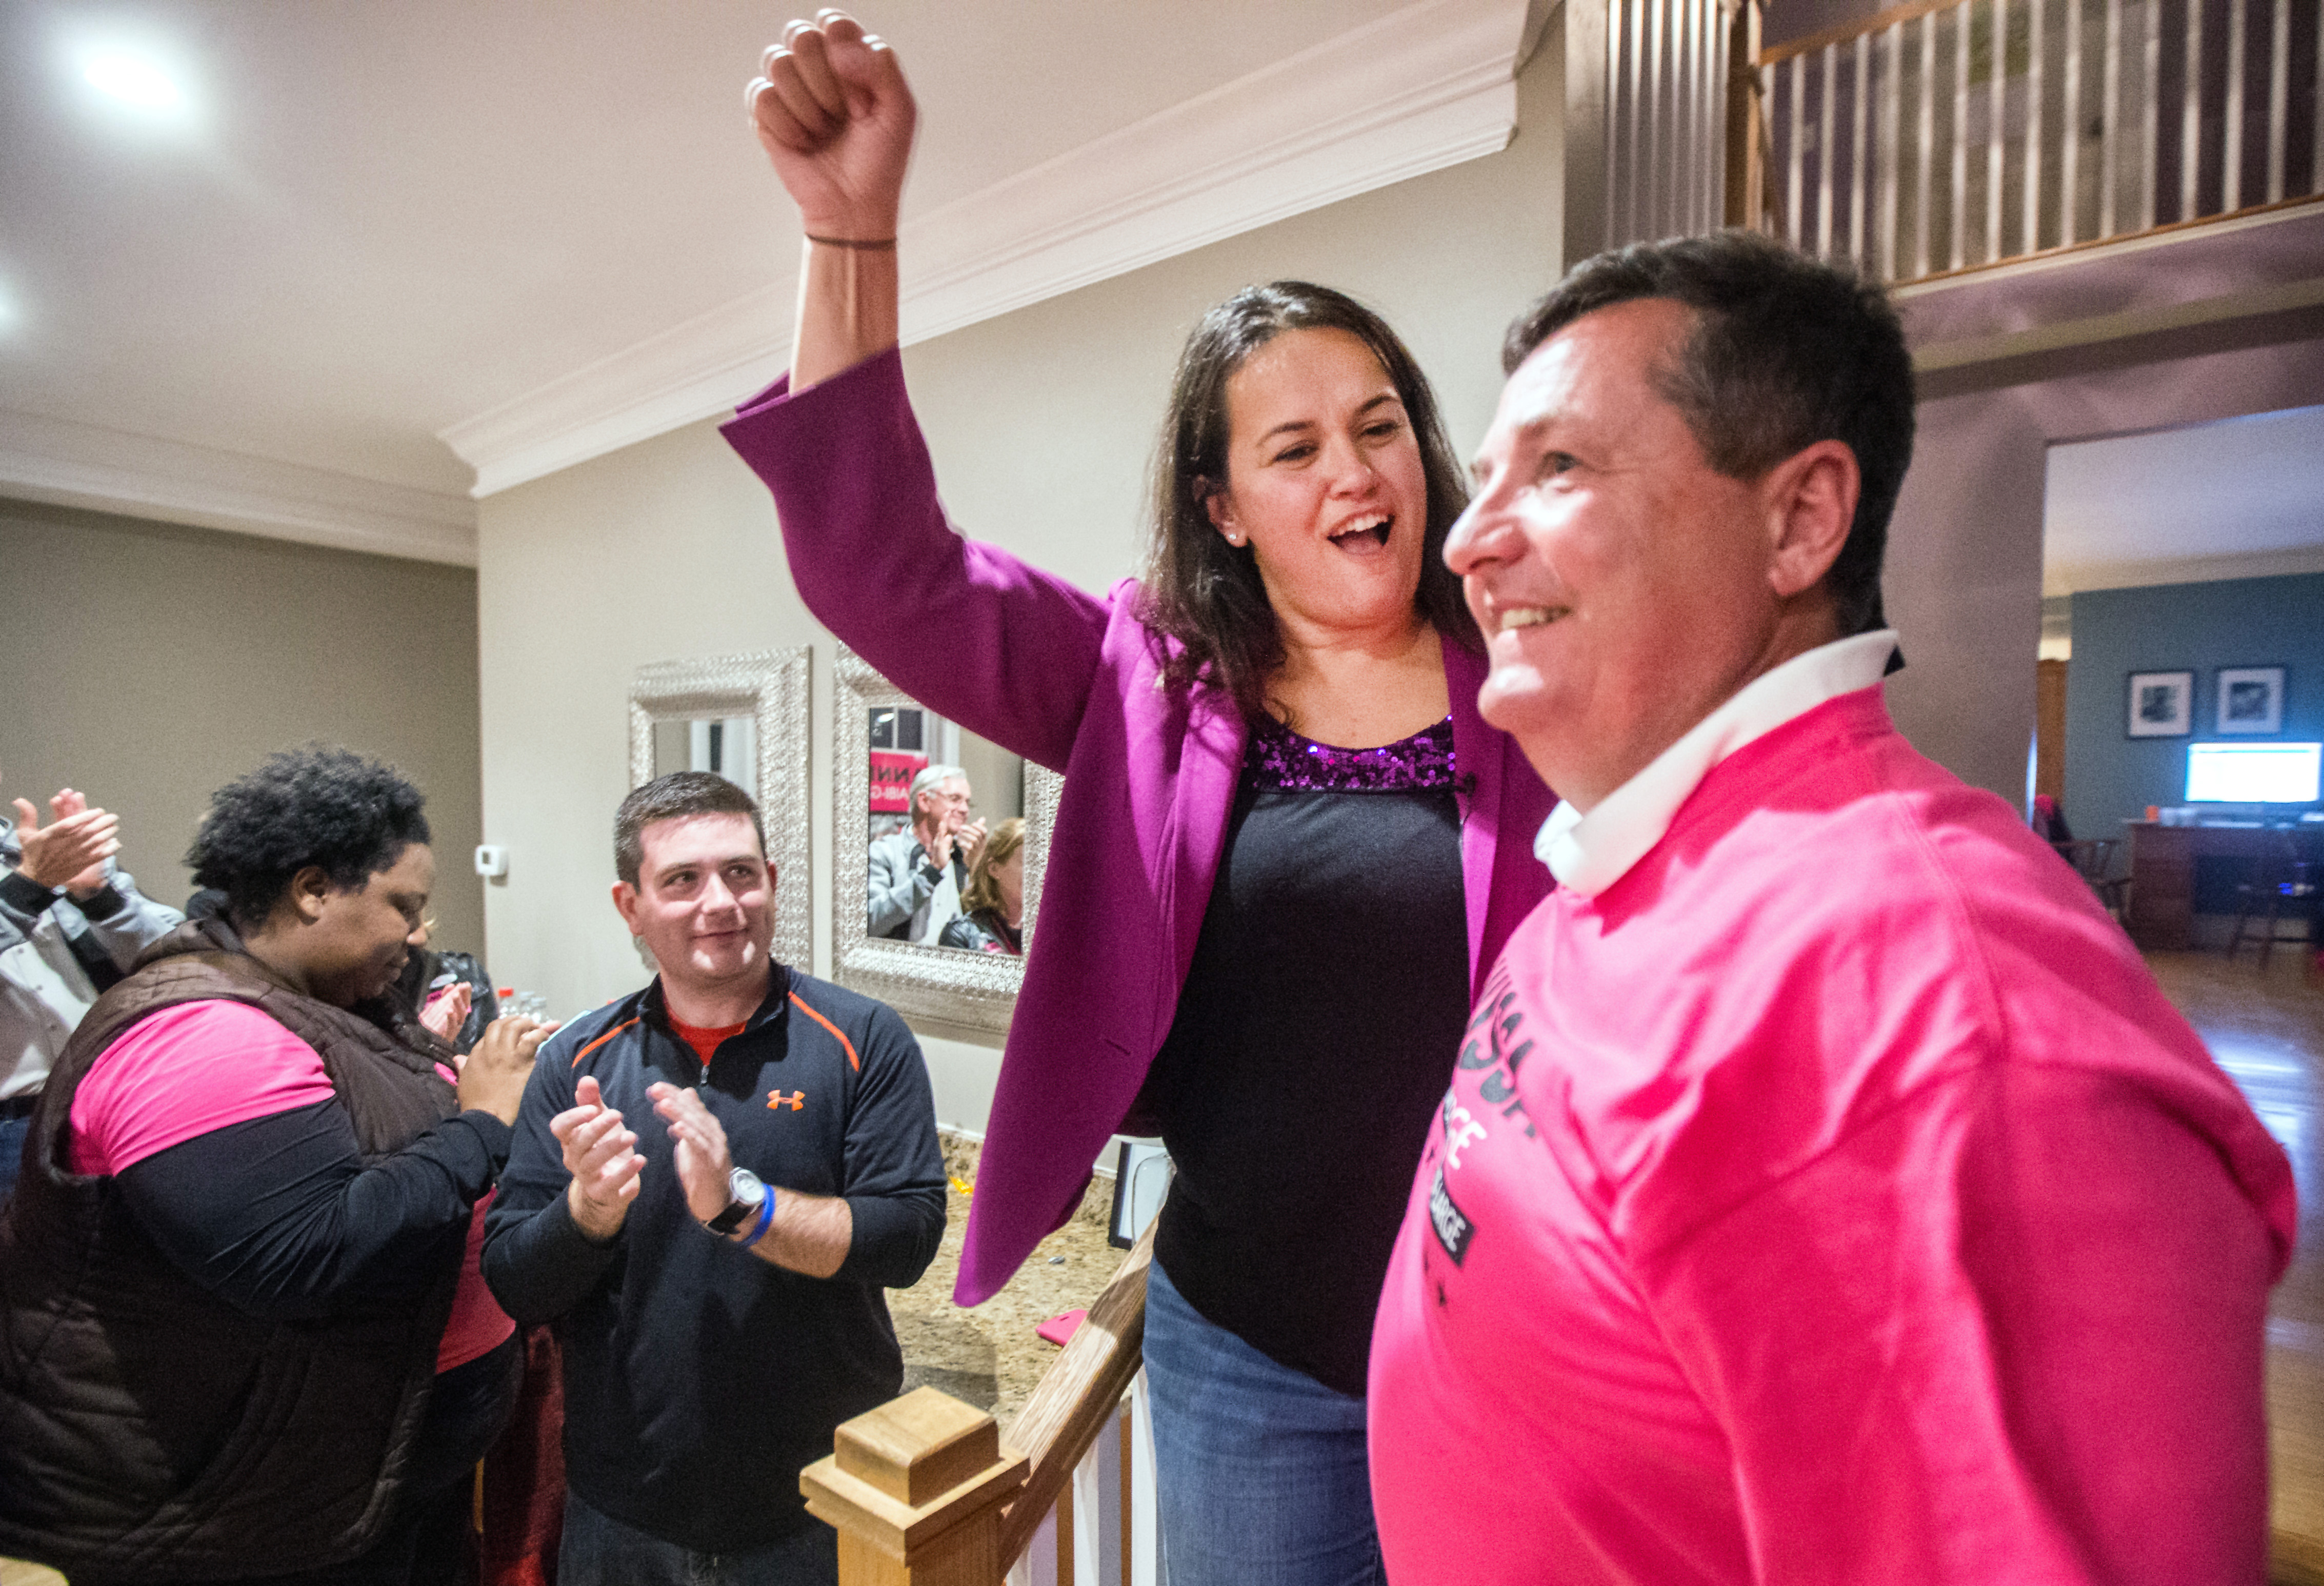 Annissa Essaibi George celebrated her 2015 election victory on Boston City Council with her husband Doug George during a party at their Dorchester home.